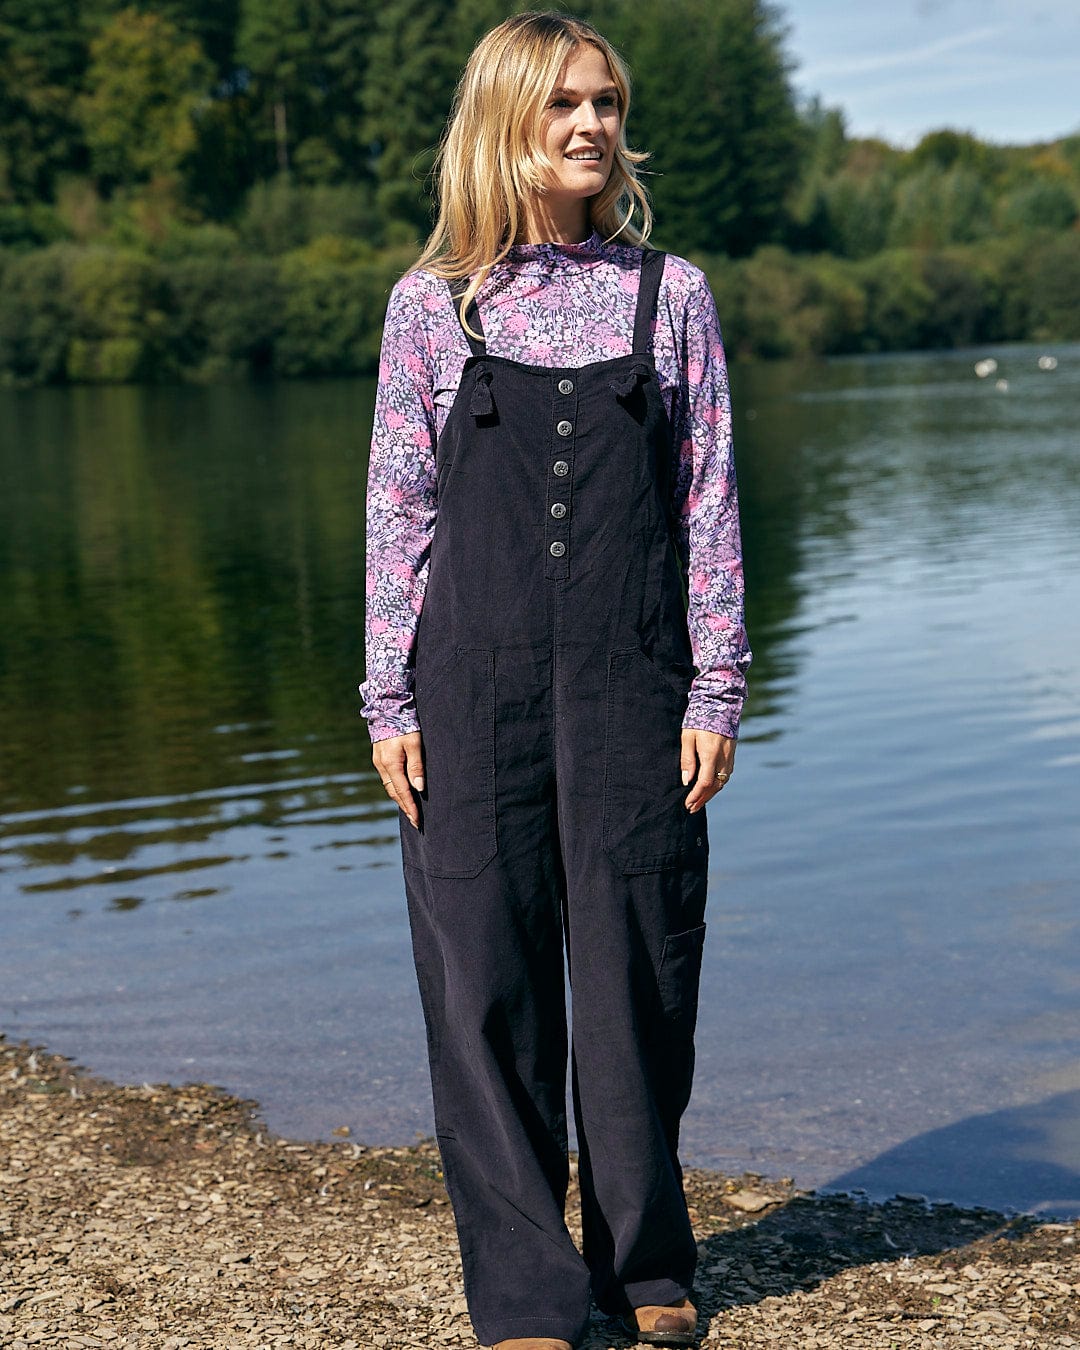 A stylish woman in comfortable Saltrock overalls standing by a lake.